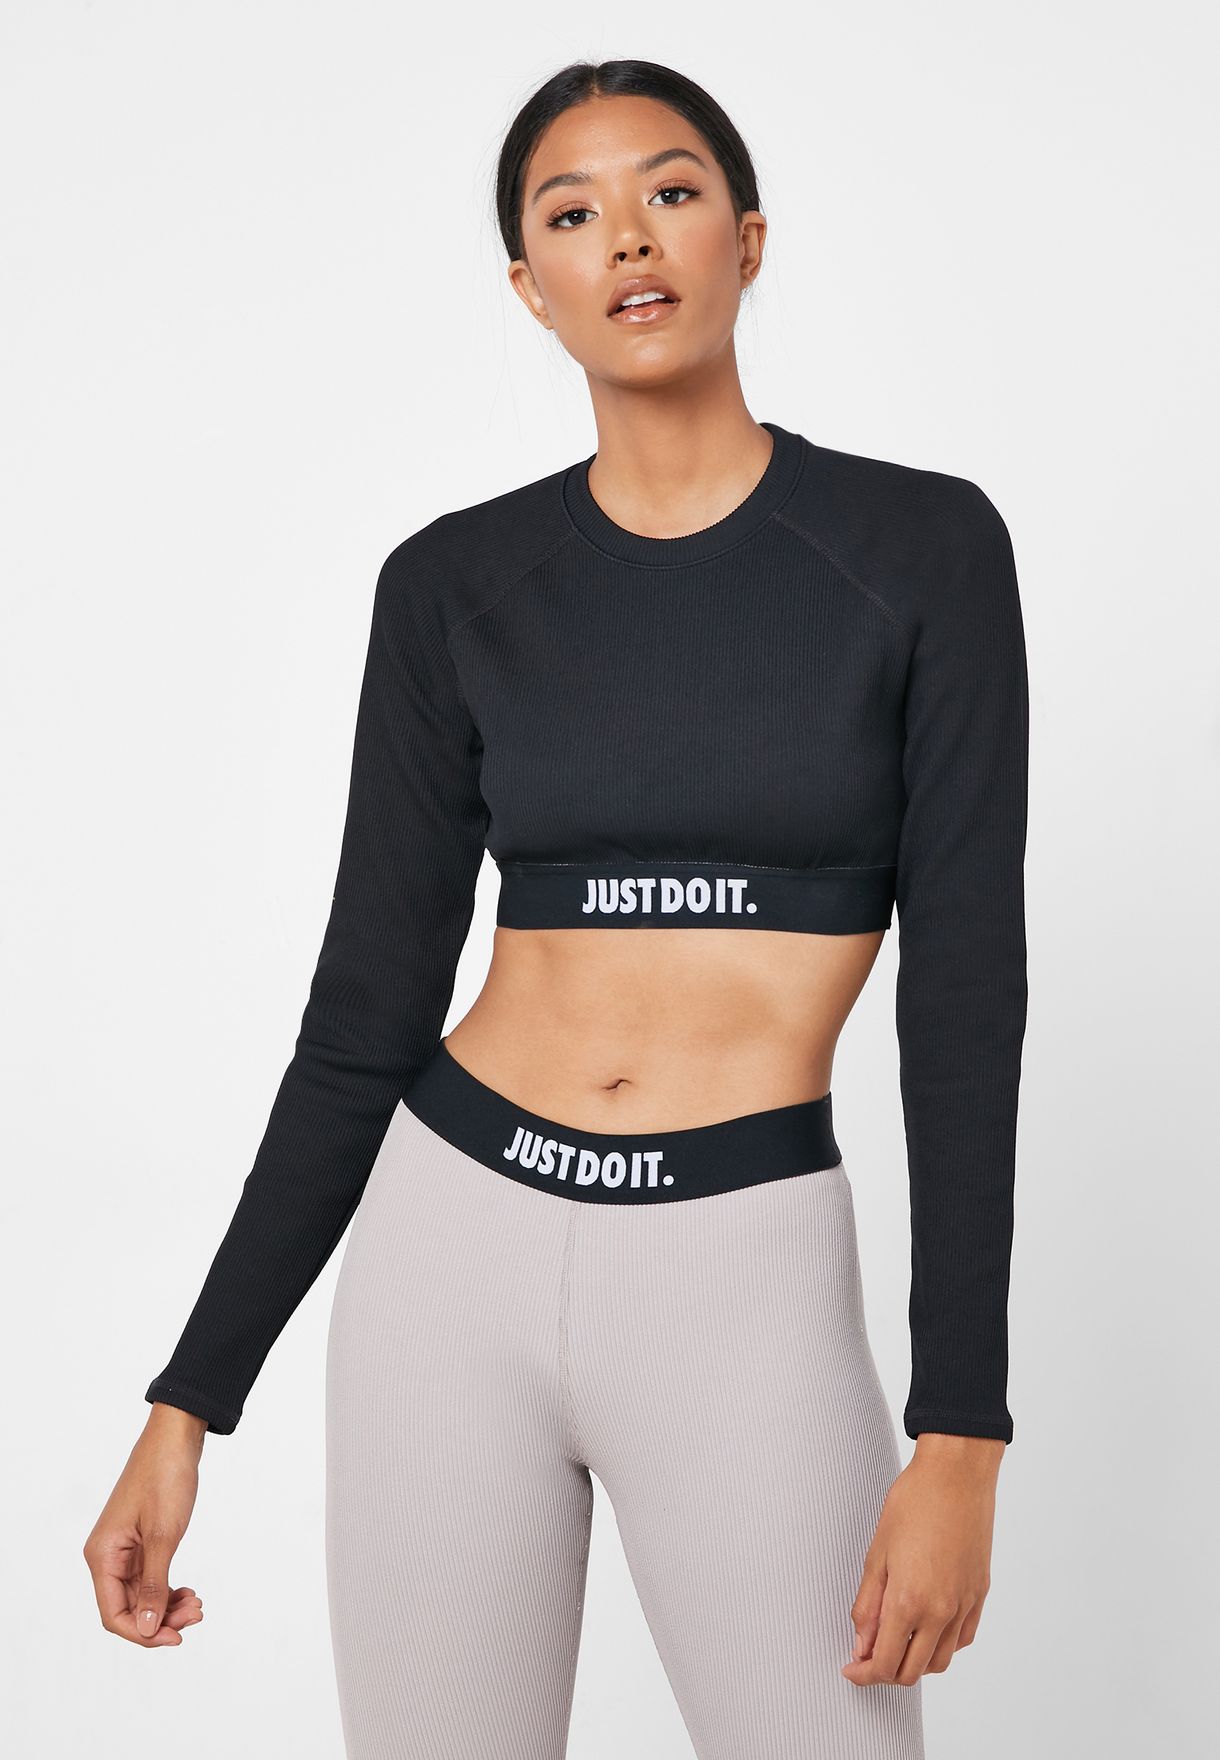 just do it top womens